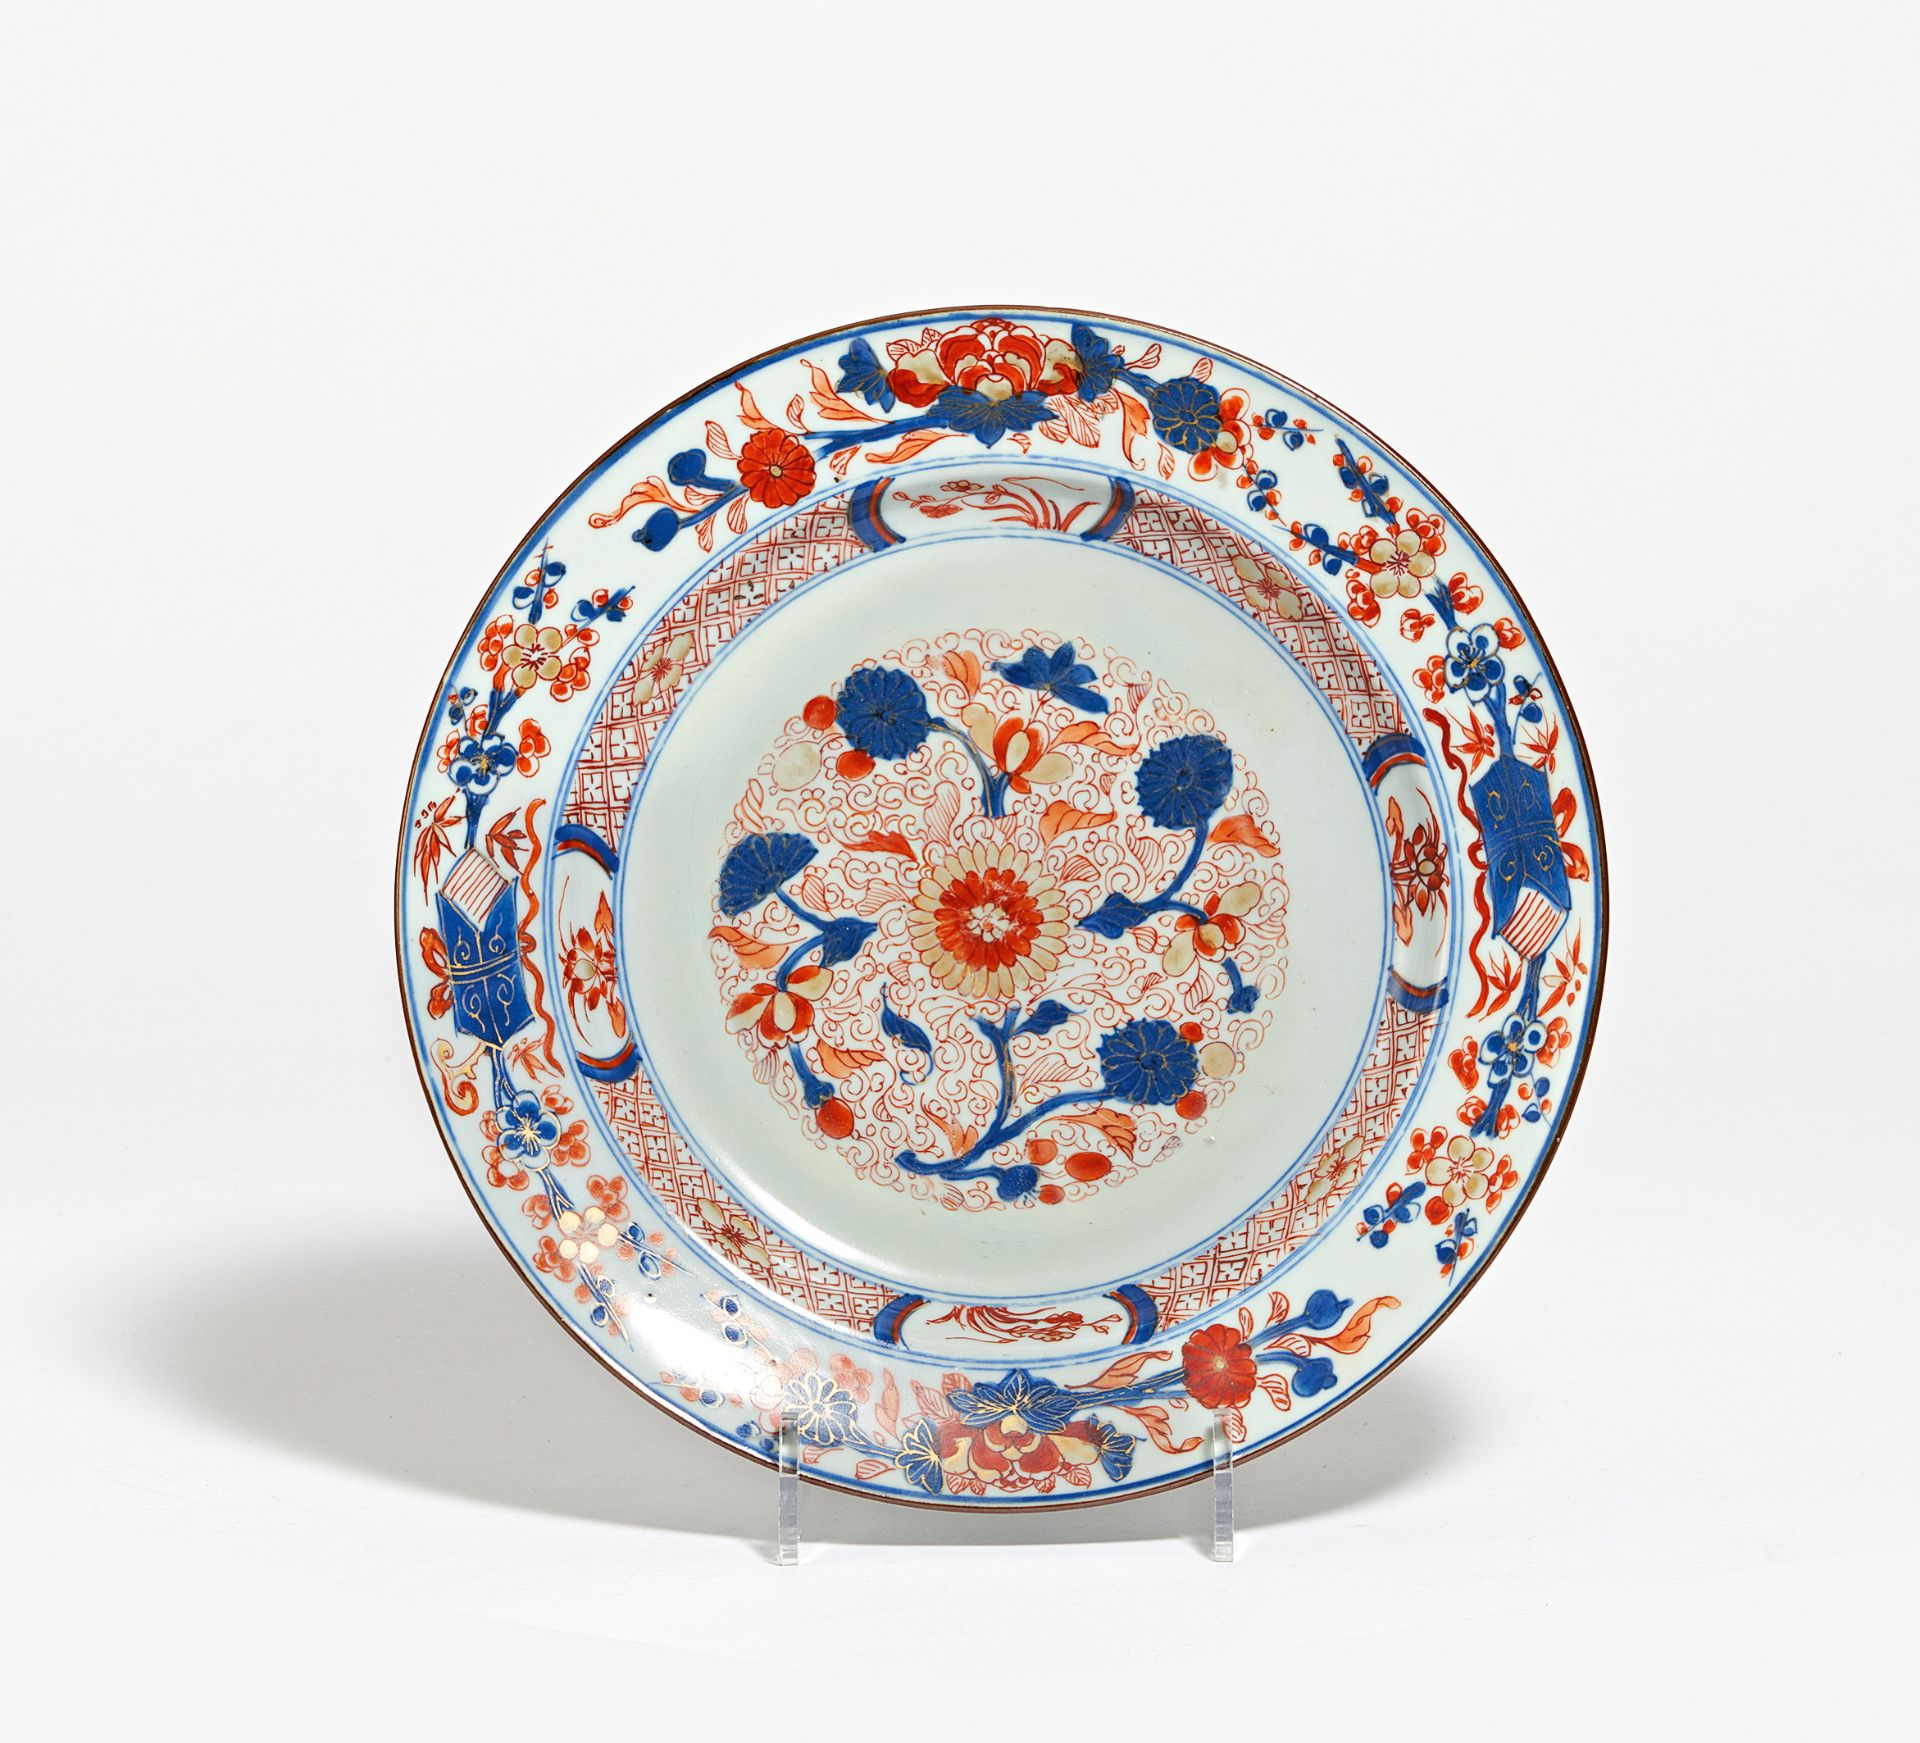 IMARI PLATE WITH FLORAL DECOR. China. Qing Dynasty. 18th c. Export porcelain. Underglaze blue and